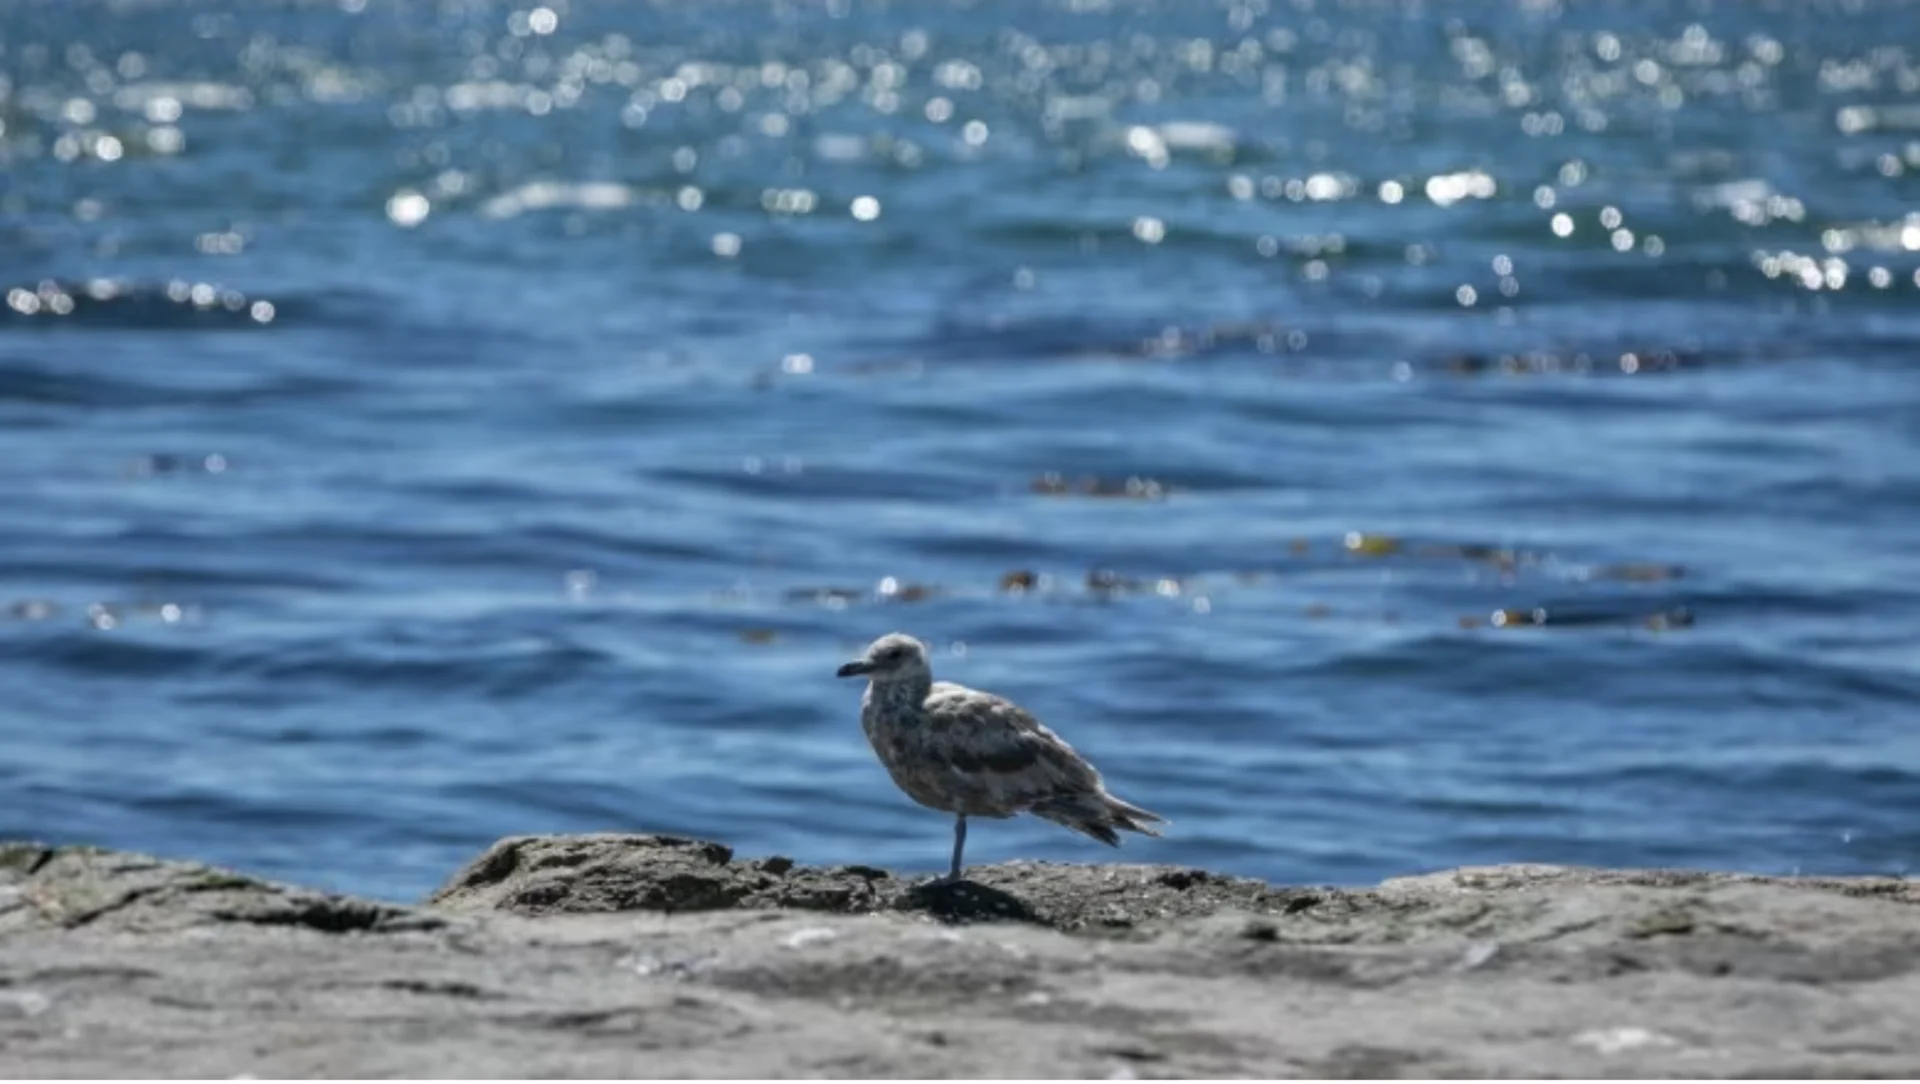 Marine heat wave could be detrimental to birds in B.C. Here's how you can help